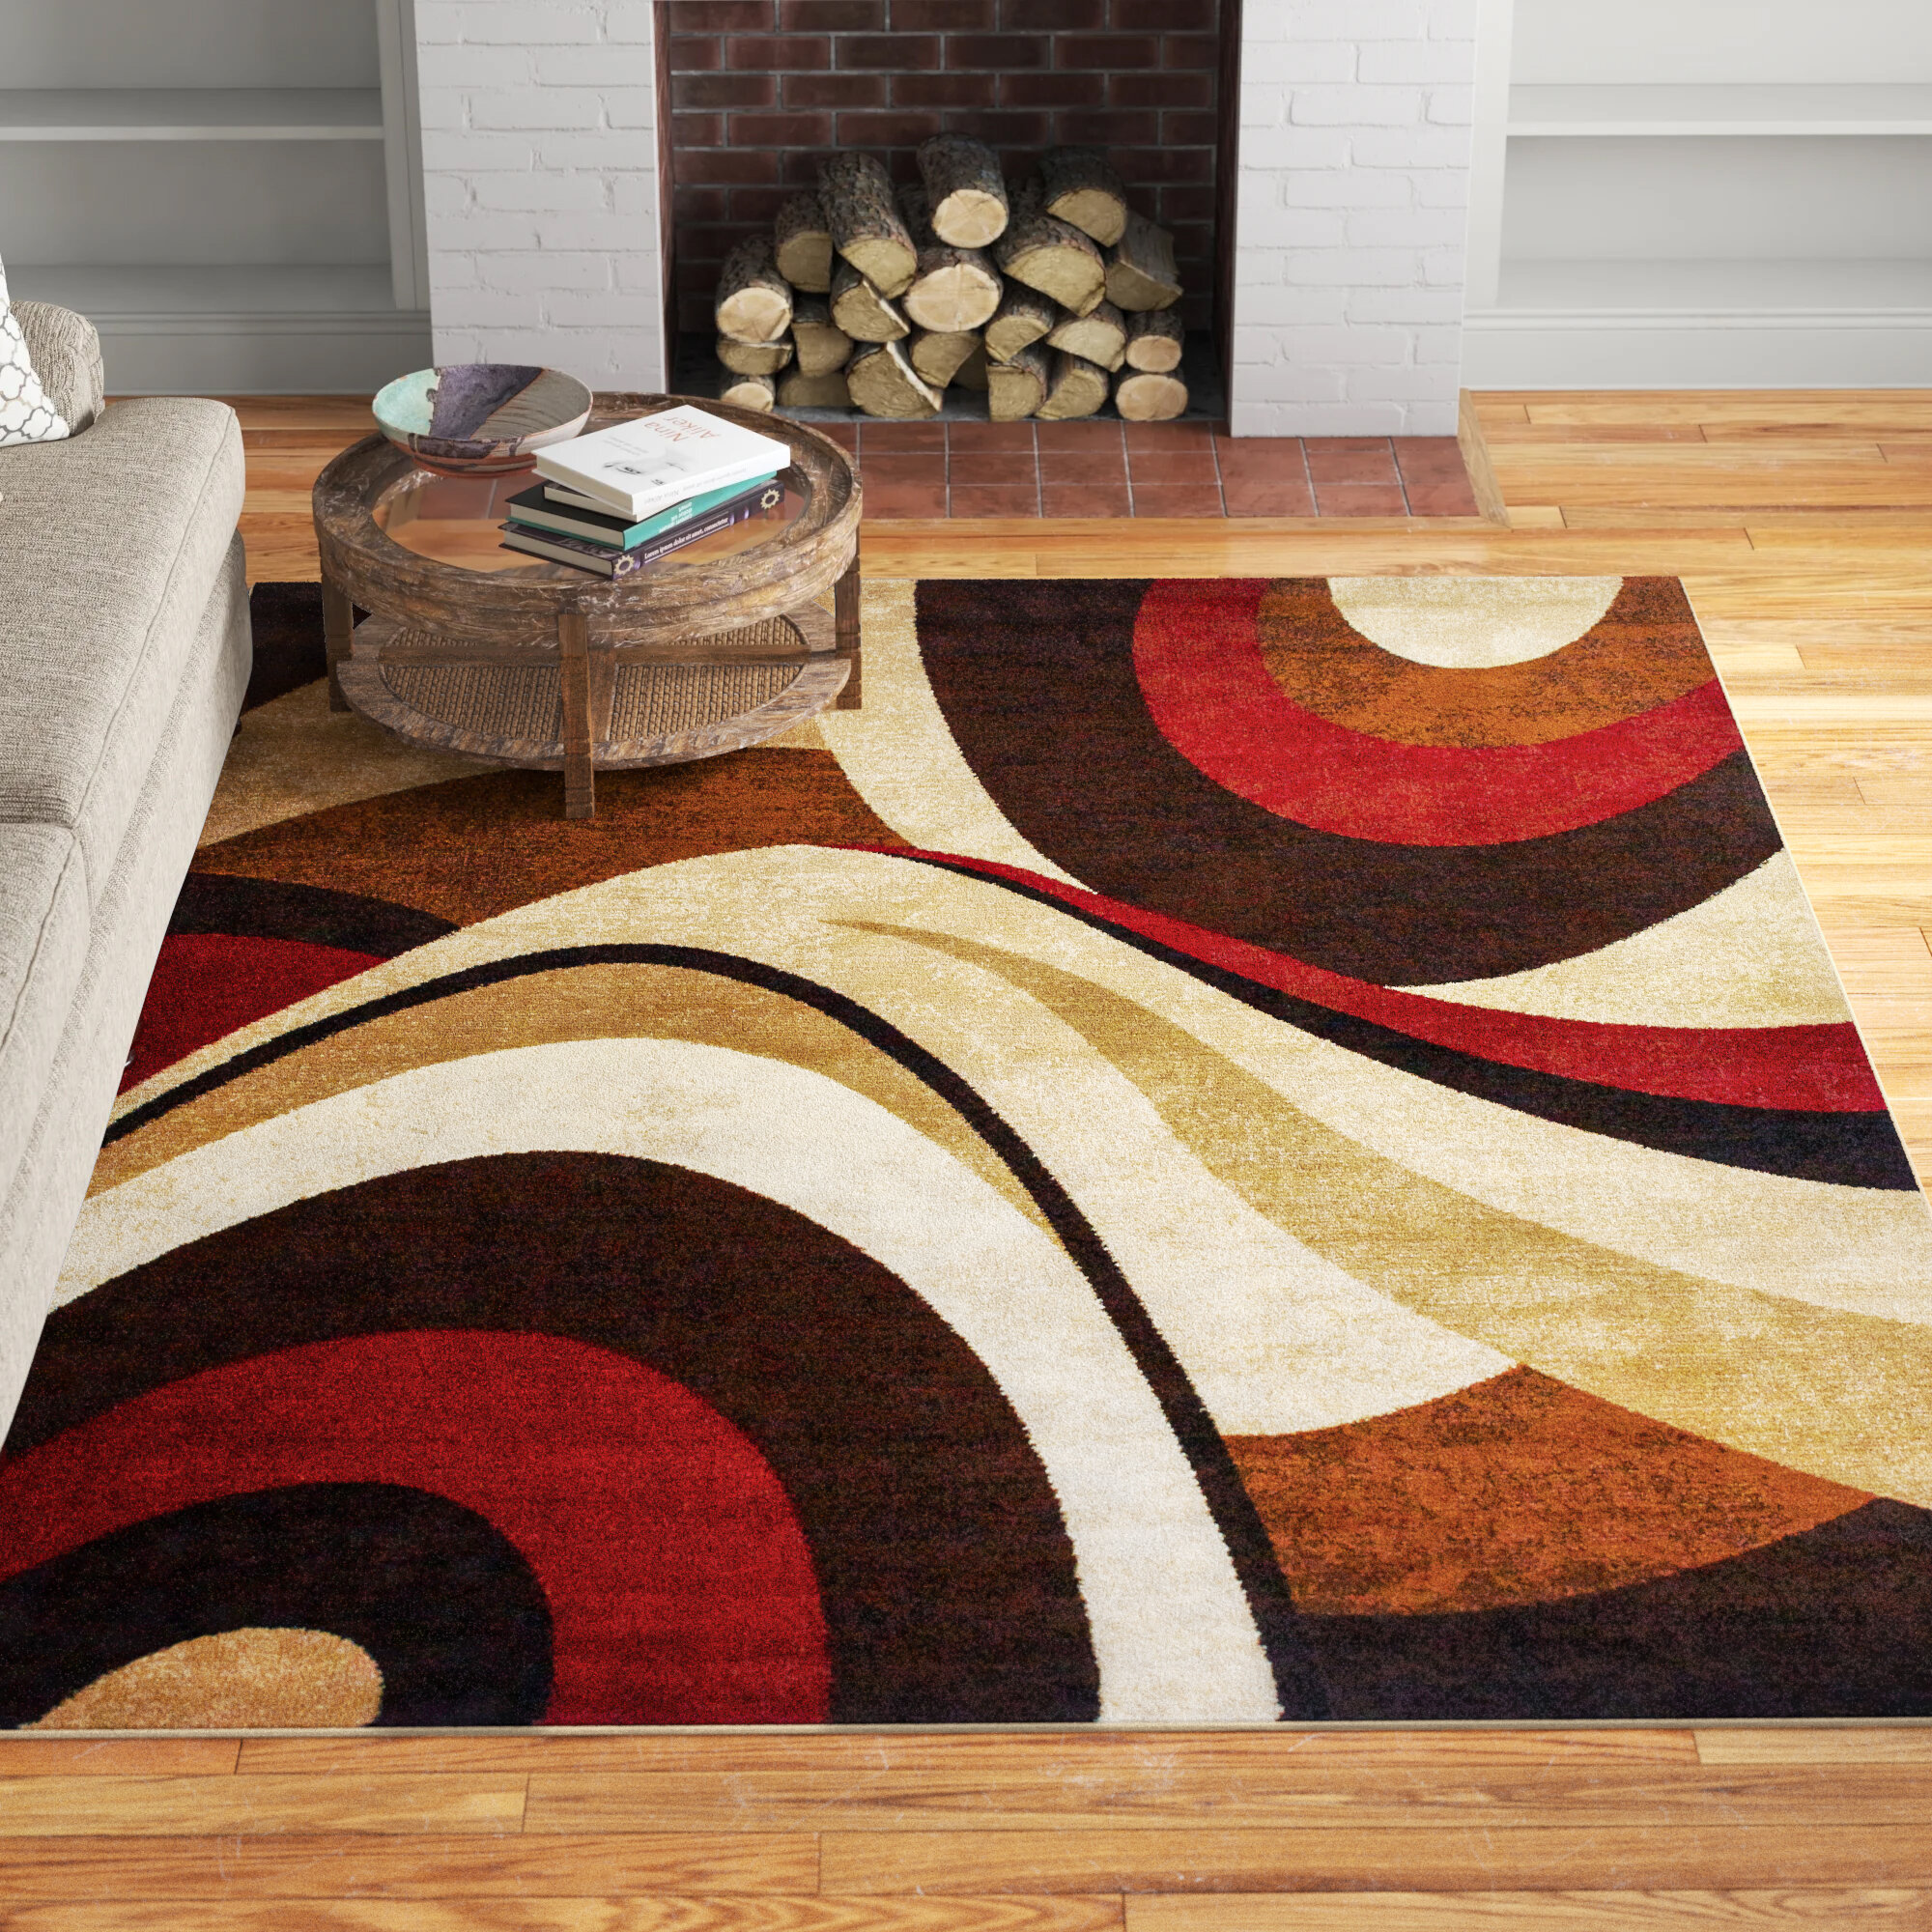 Floor Mat, Small Rug, Thick Carpet, Rectangle Rug, Red And Yellow Rug,  Abstract Rug, Modern Rug, Decor Rug, Made In USA, Flat Woven Rug